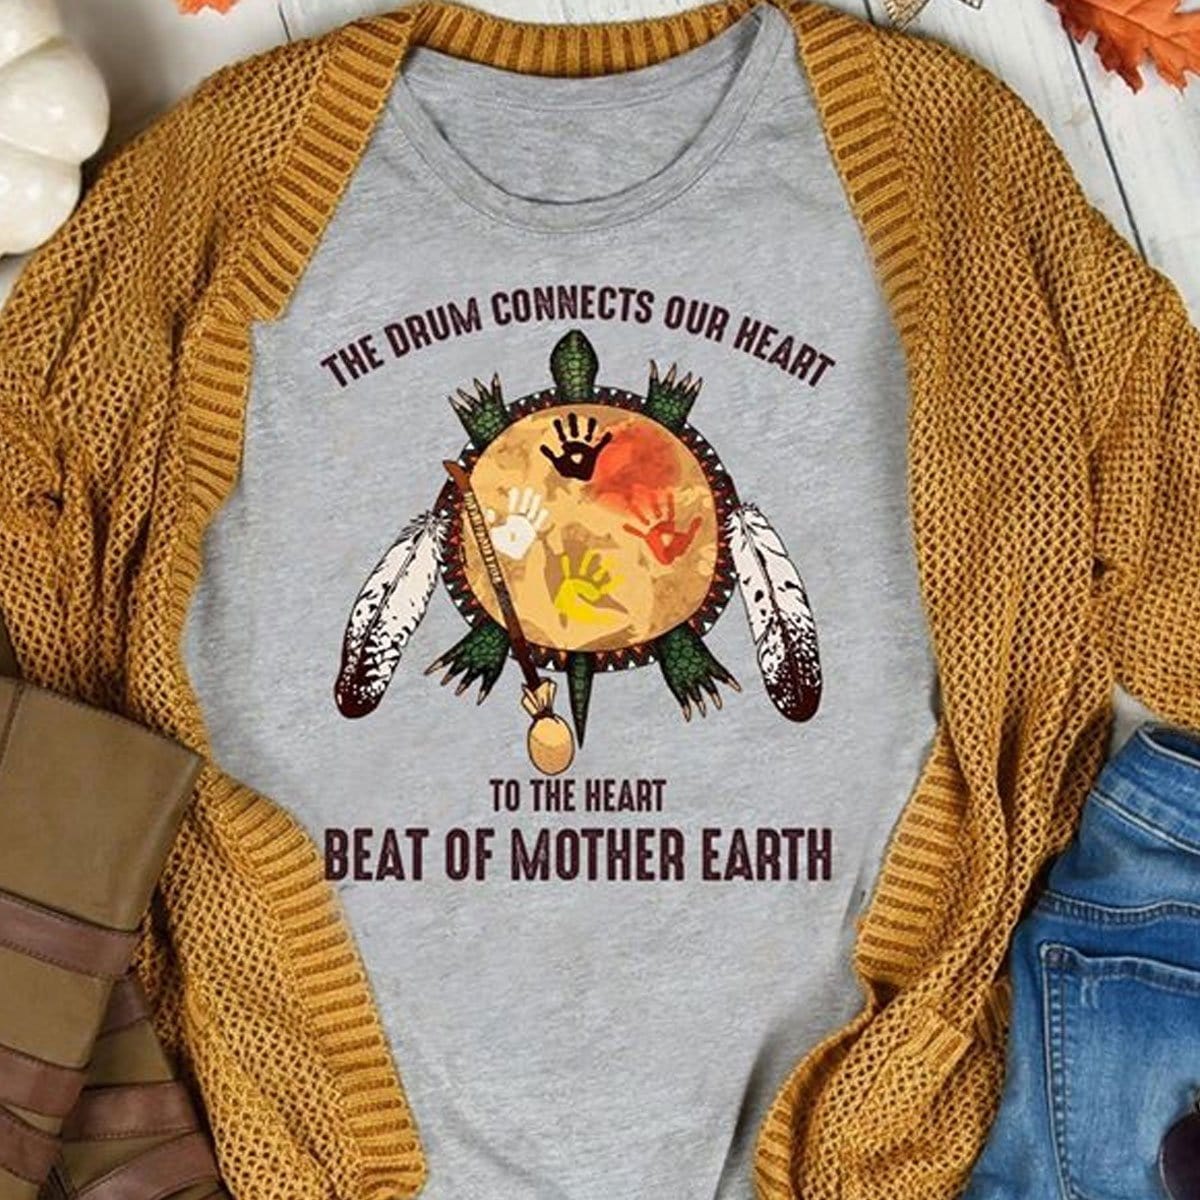 The Drum Connects Our Heart To The Heart, Beat Of Mother Earth, Native American Shirts